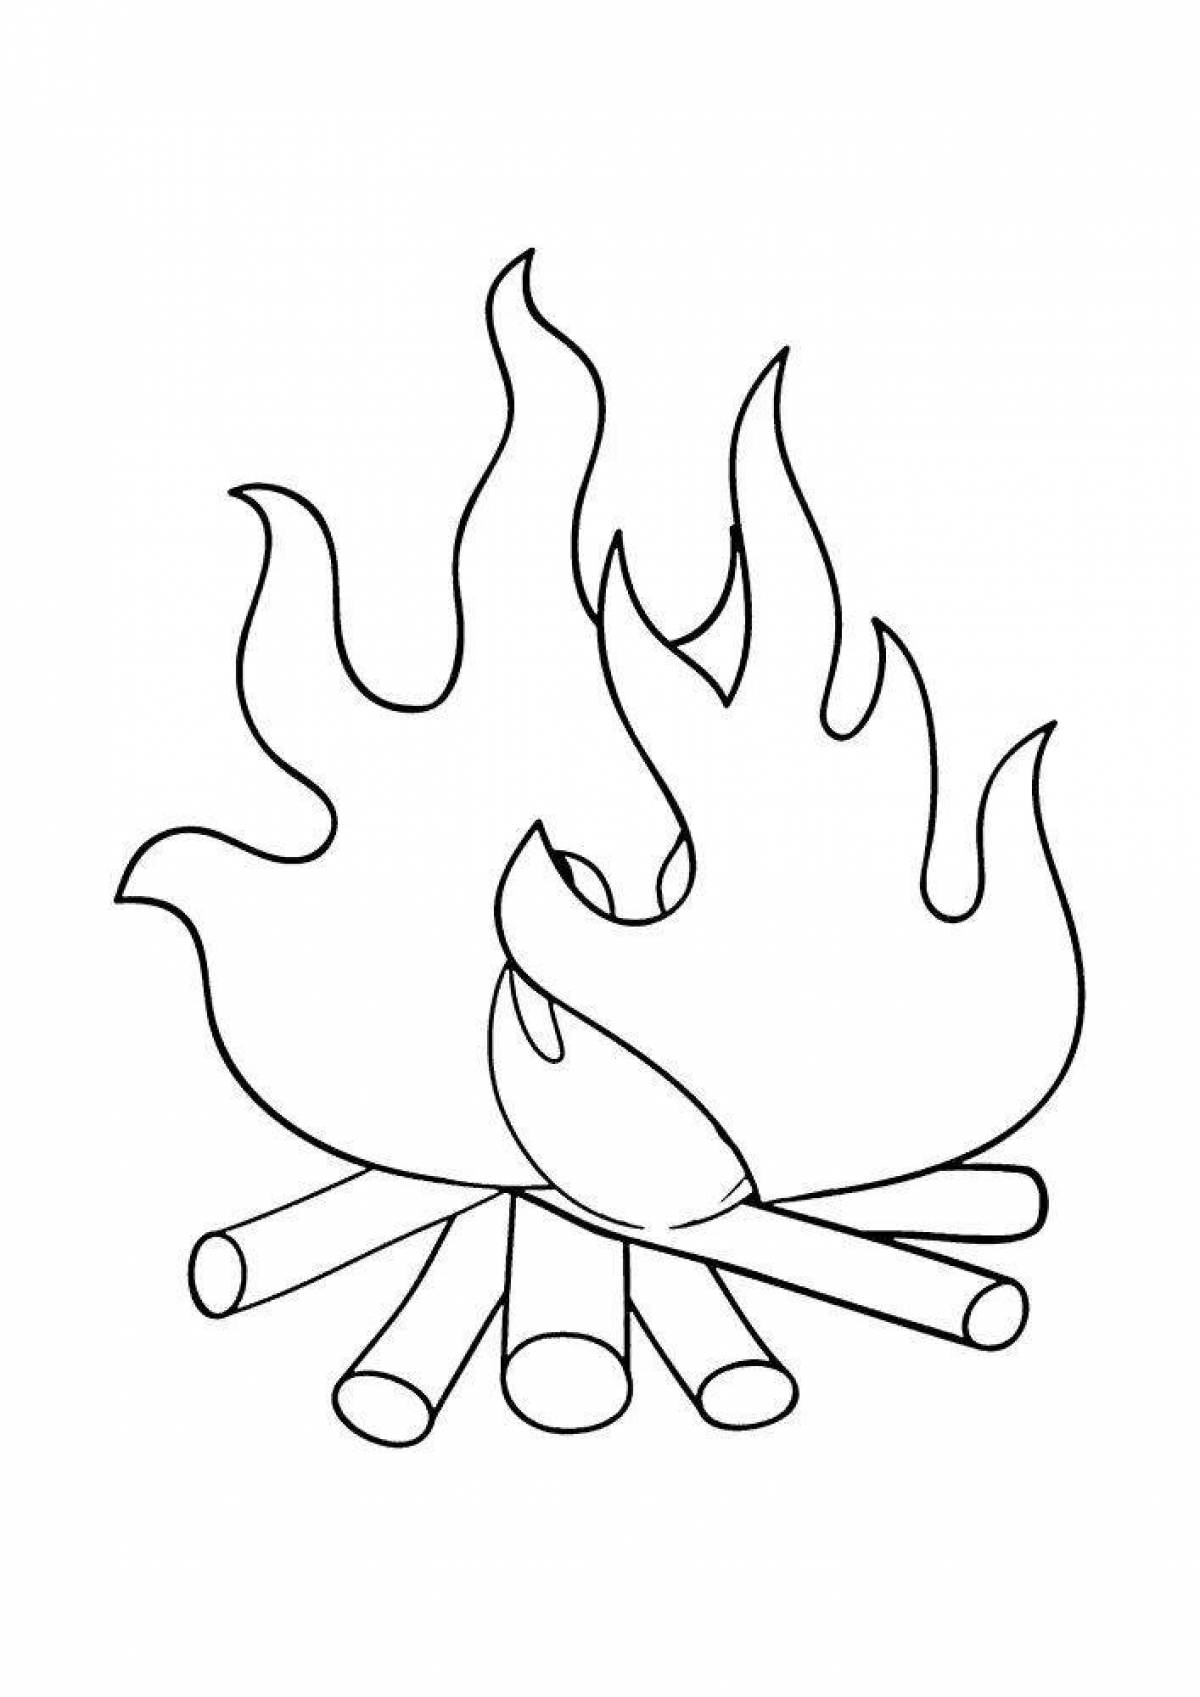 Glowing fire and water coloring page